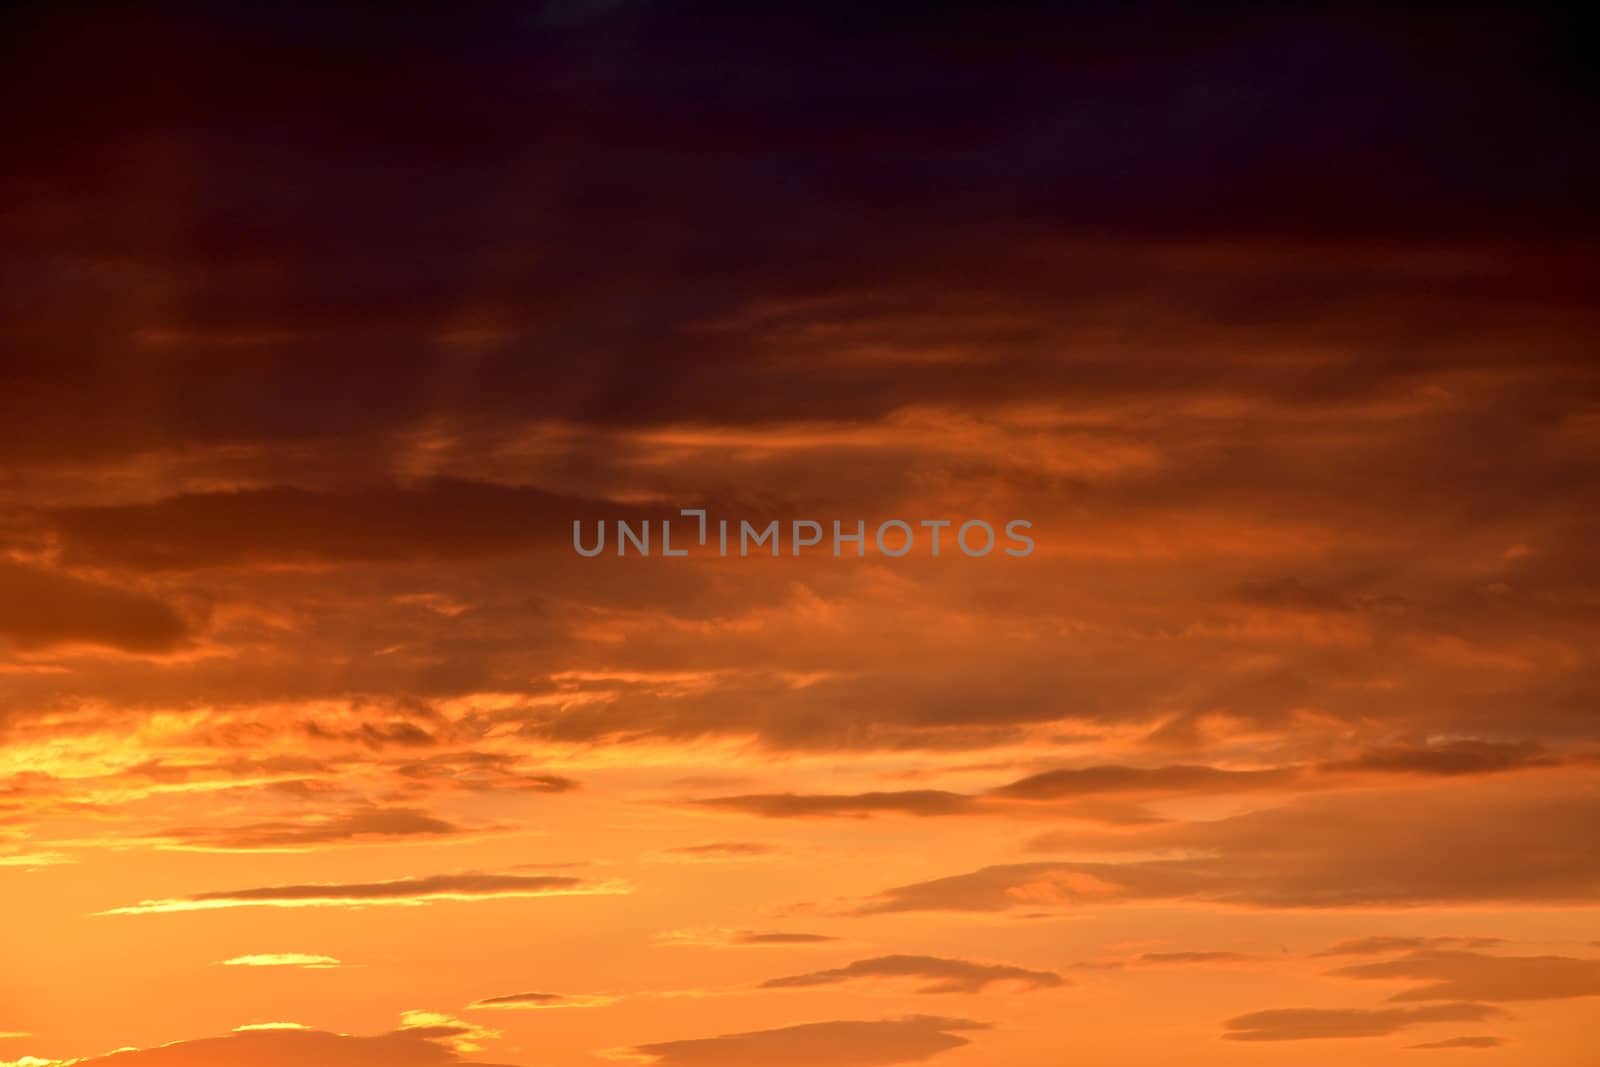 Sunset by photosampler